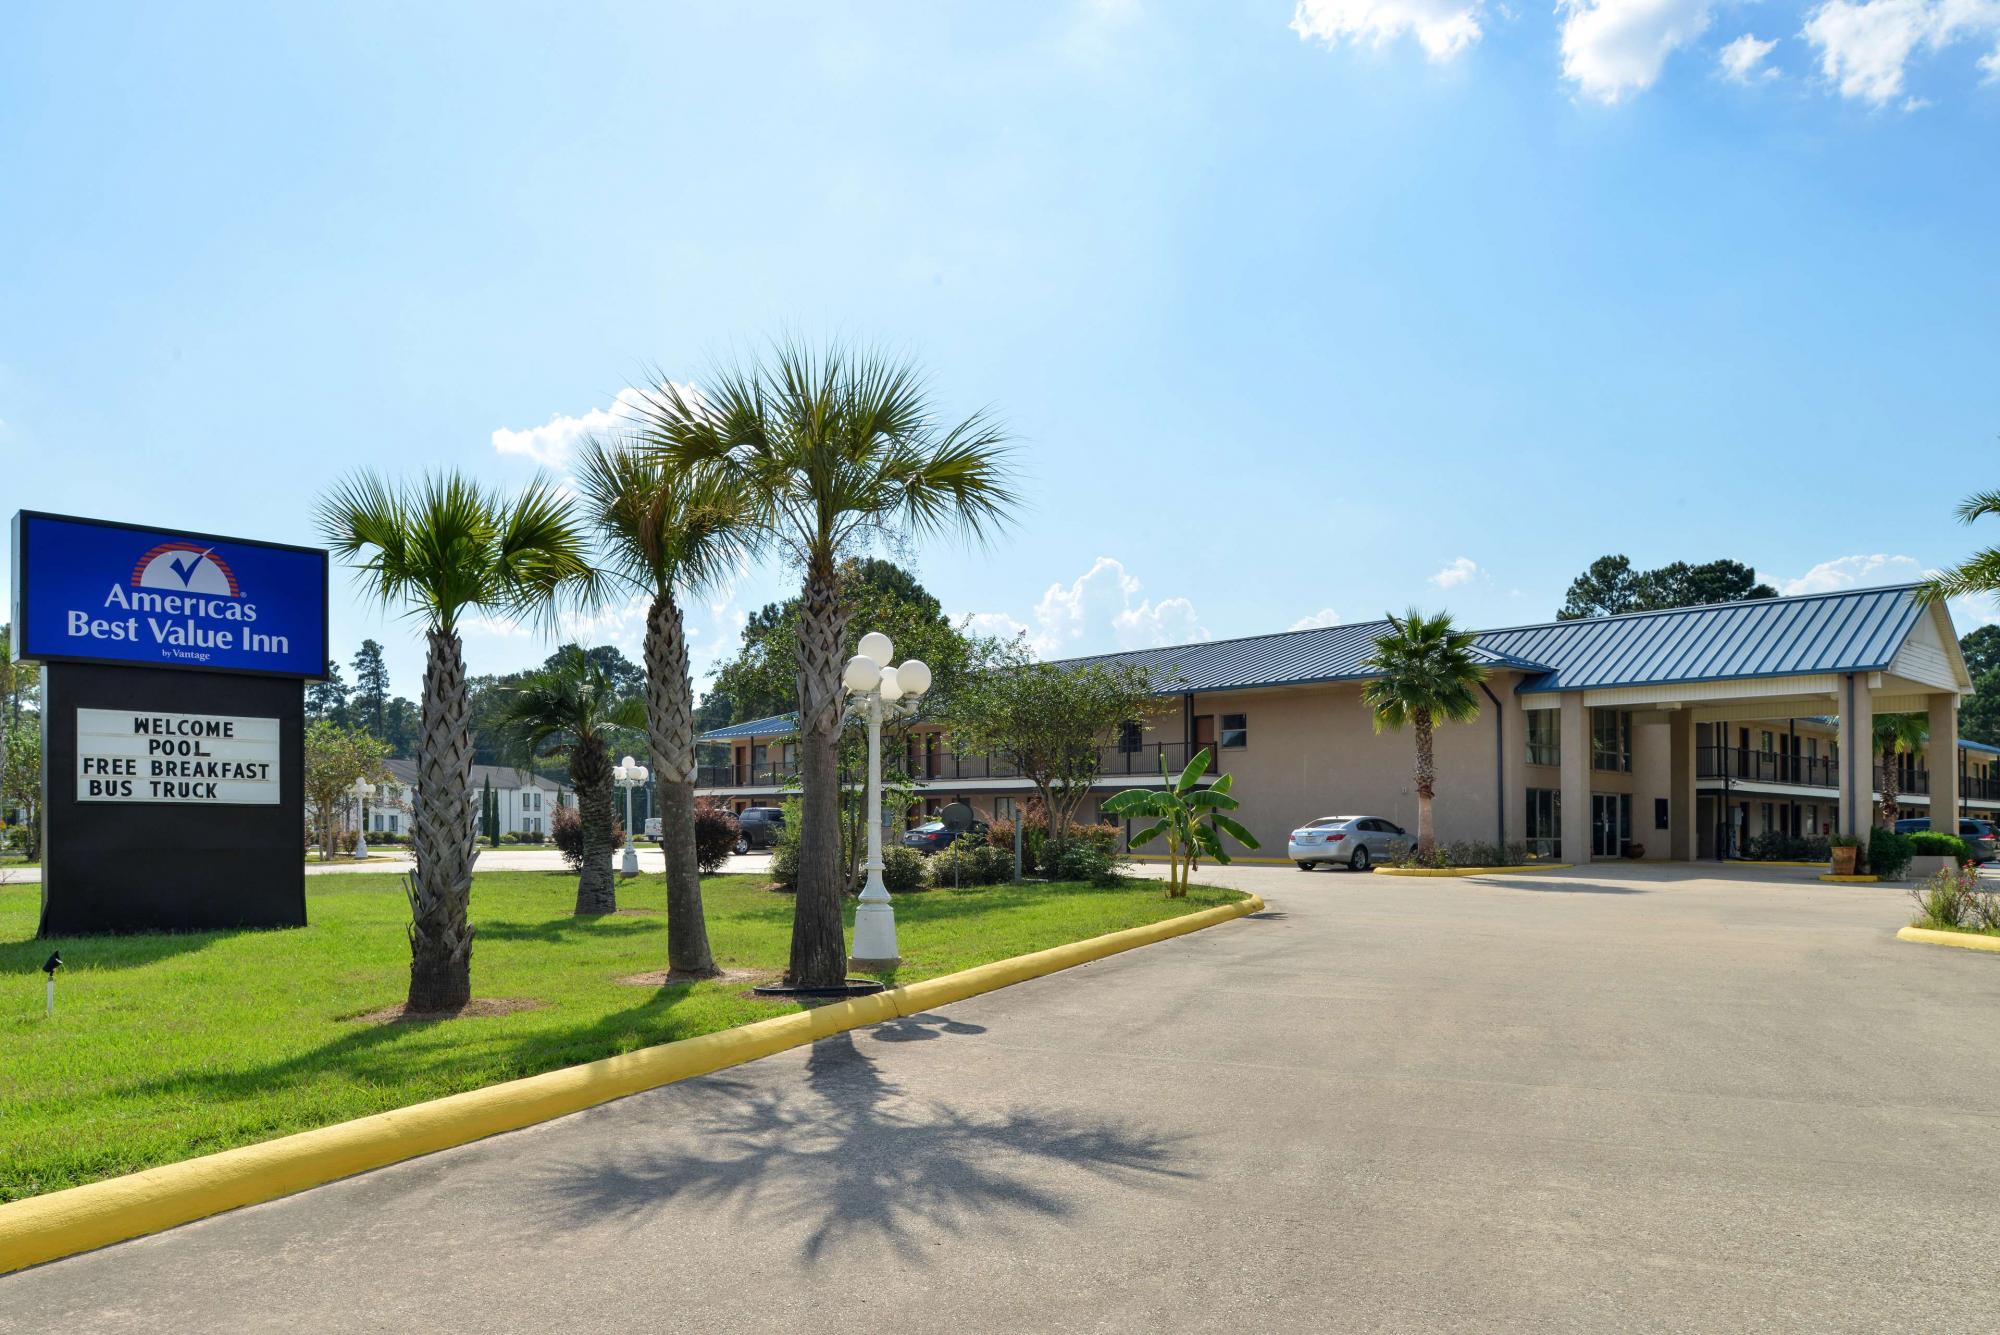 Street view of hotel entrance exterior with lawn area